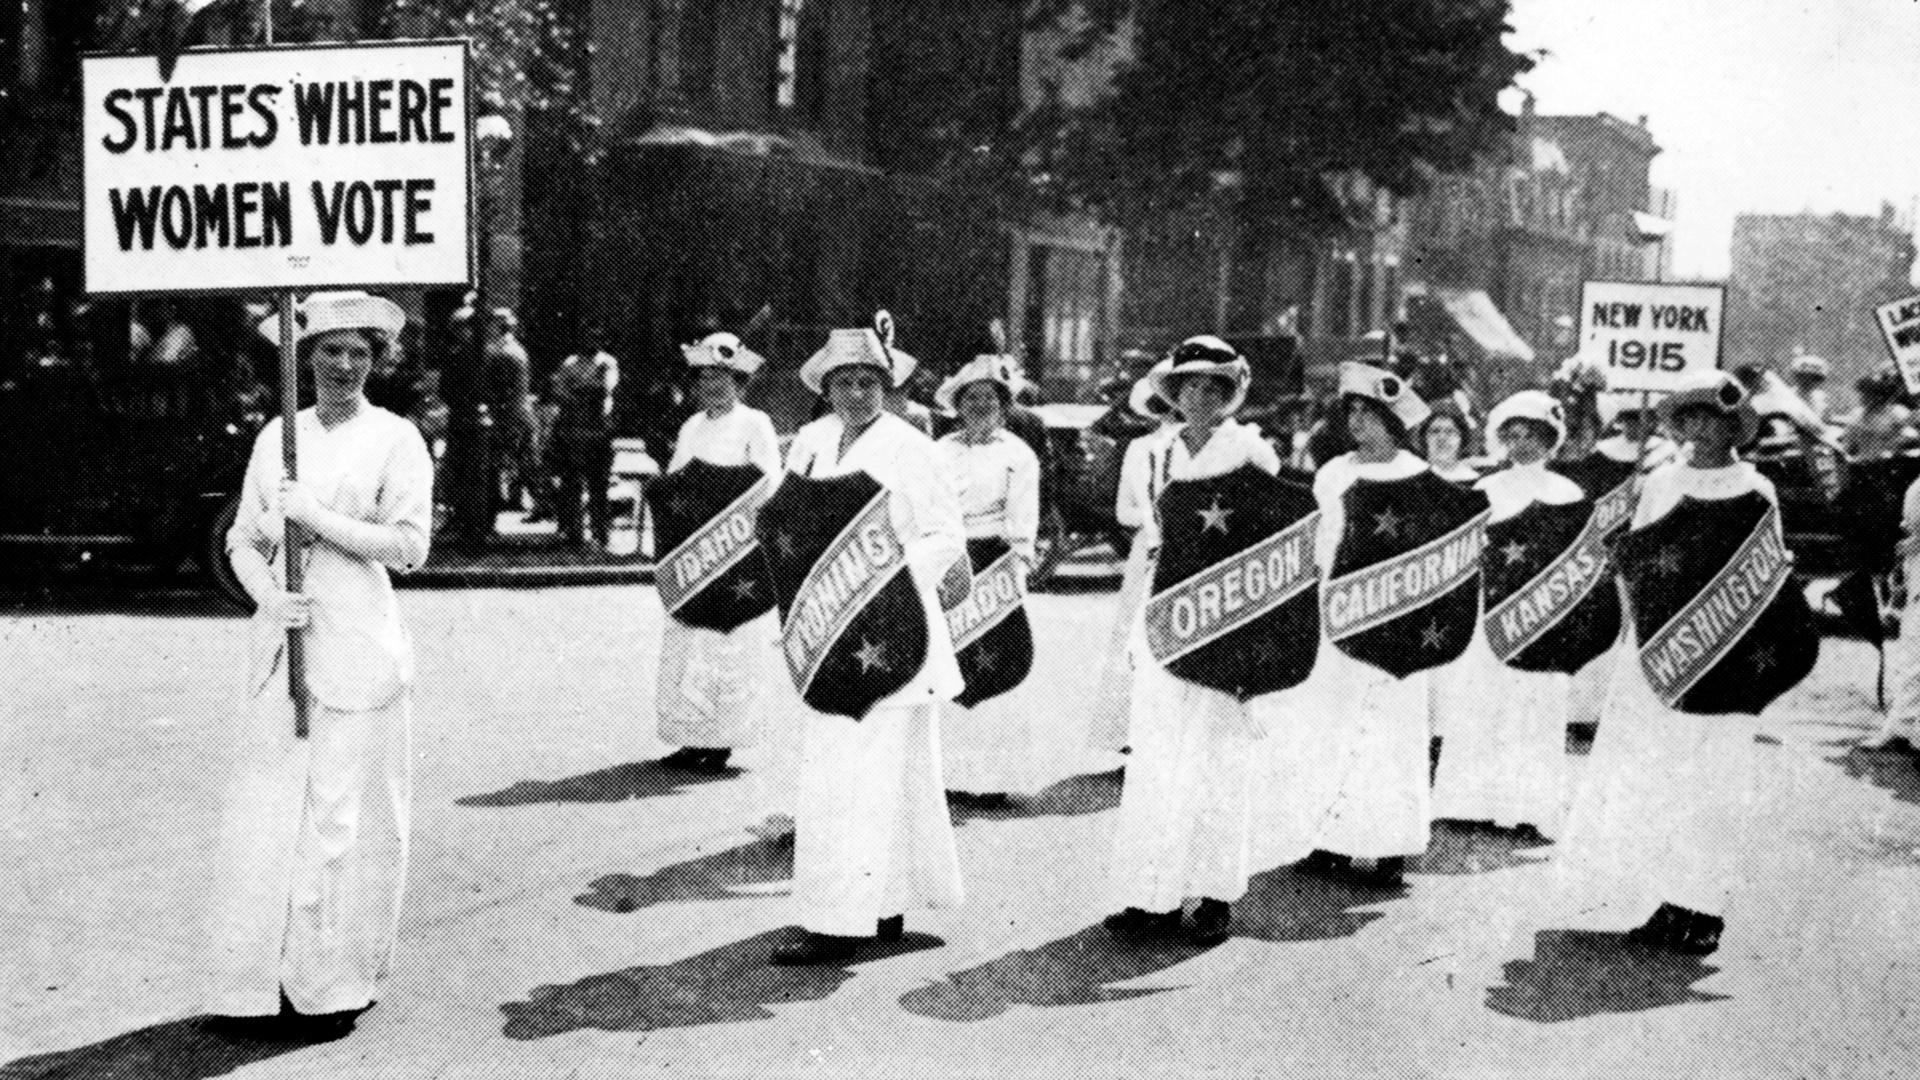 Suffrage was initially guaranteed at the state level. Women march in Buffalo in 1913 with signs recognizing states where women could vote.